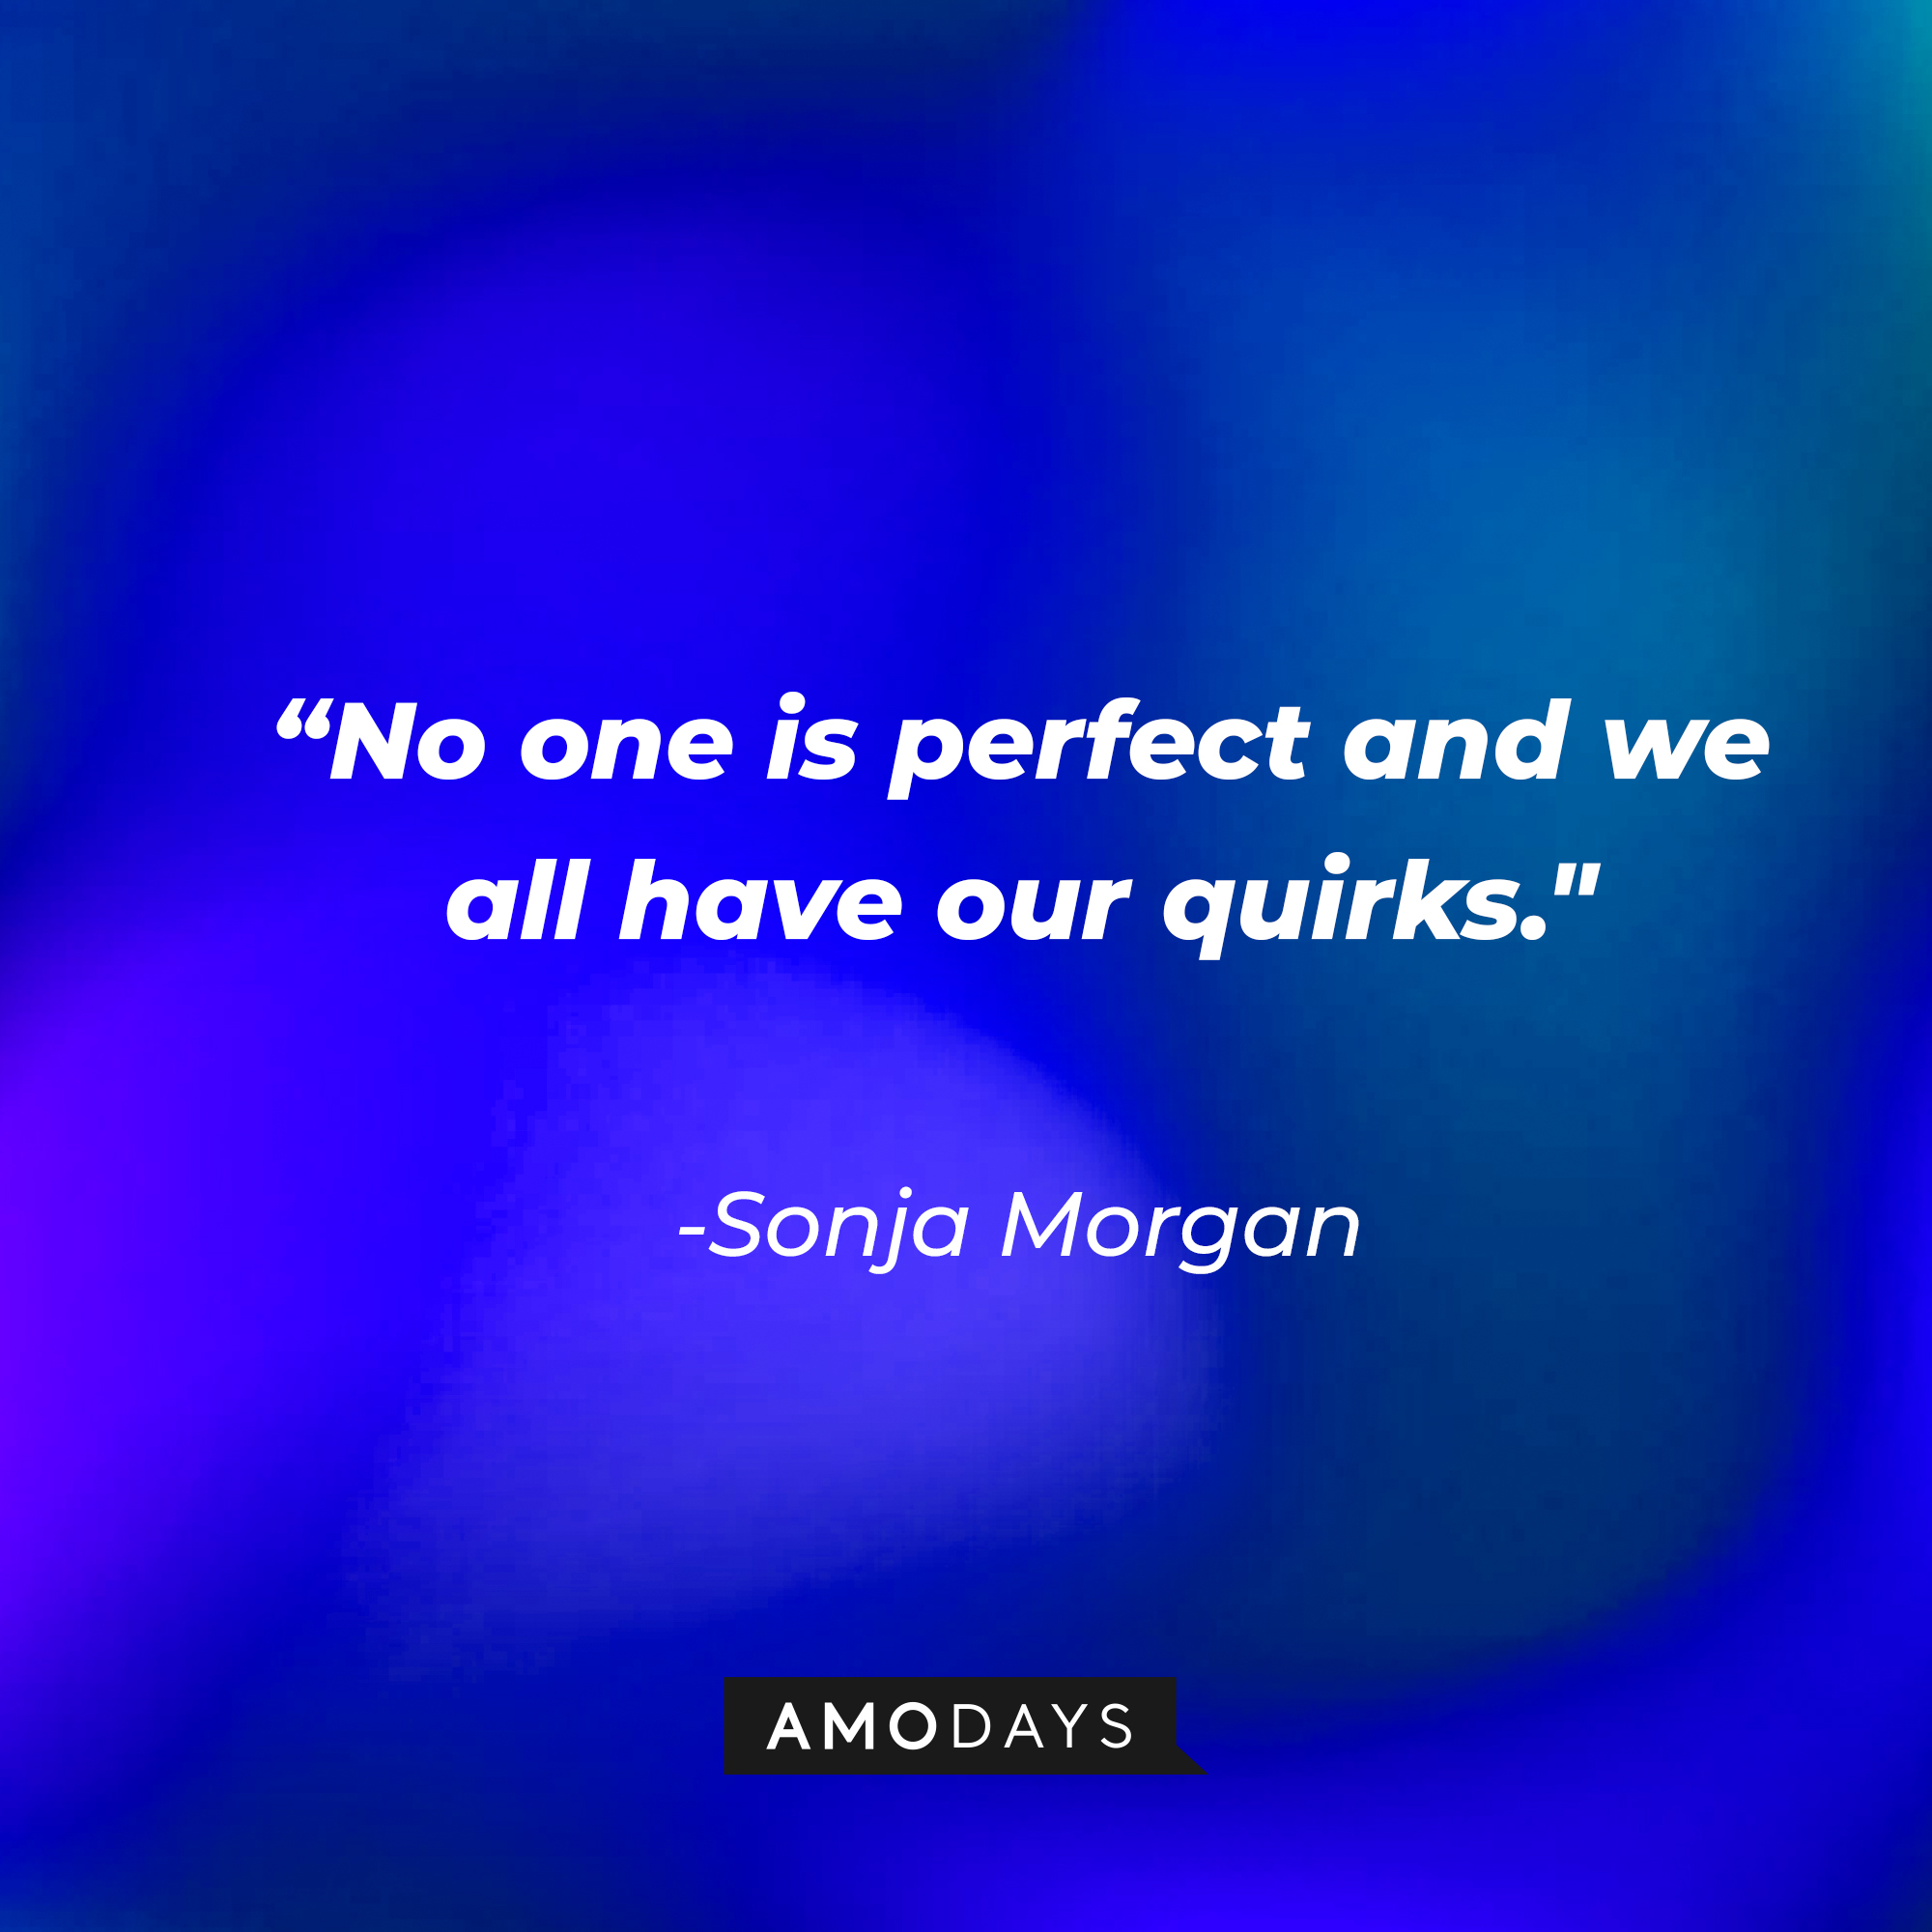 Sonja Morgan's quote: "No one is perfect and we all have our quirks." Sonja Morgan's quote: "I don't stir the pot. I stir the drink." | Source: Amodays